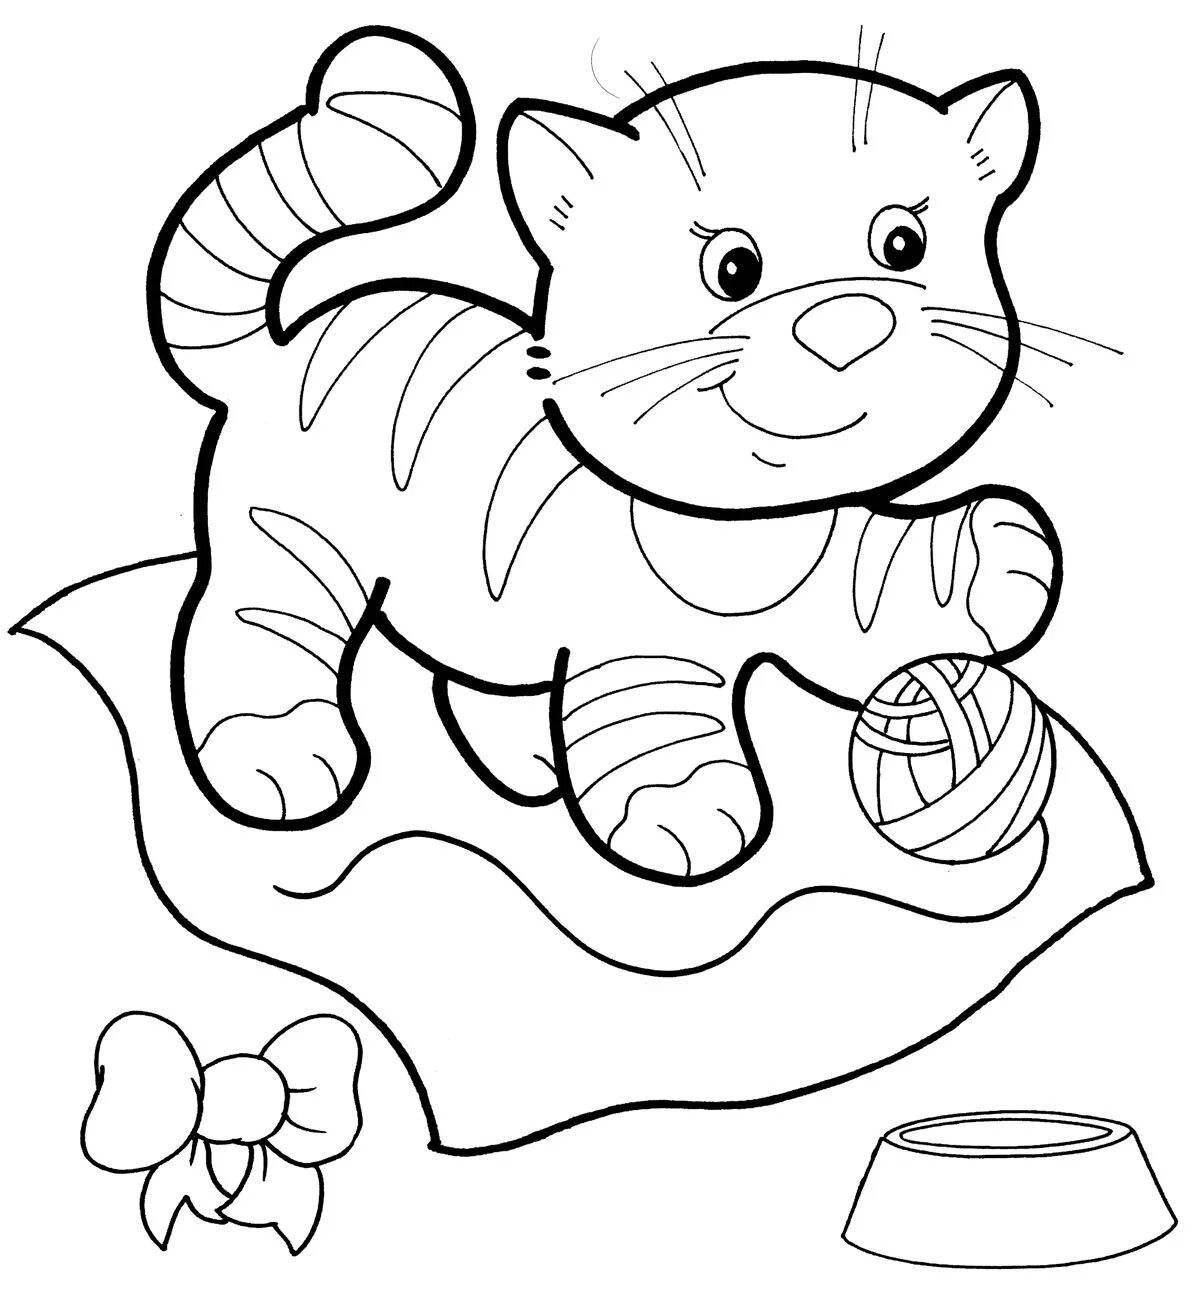 Creative coloring book for children 5-6 years old cats